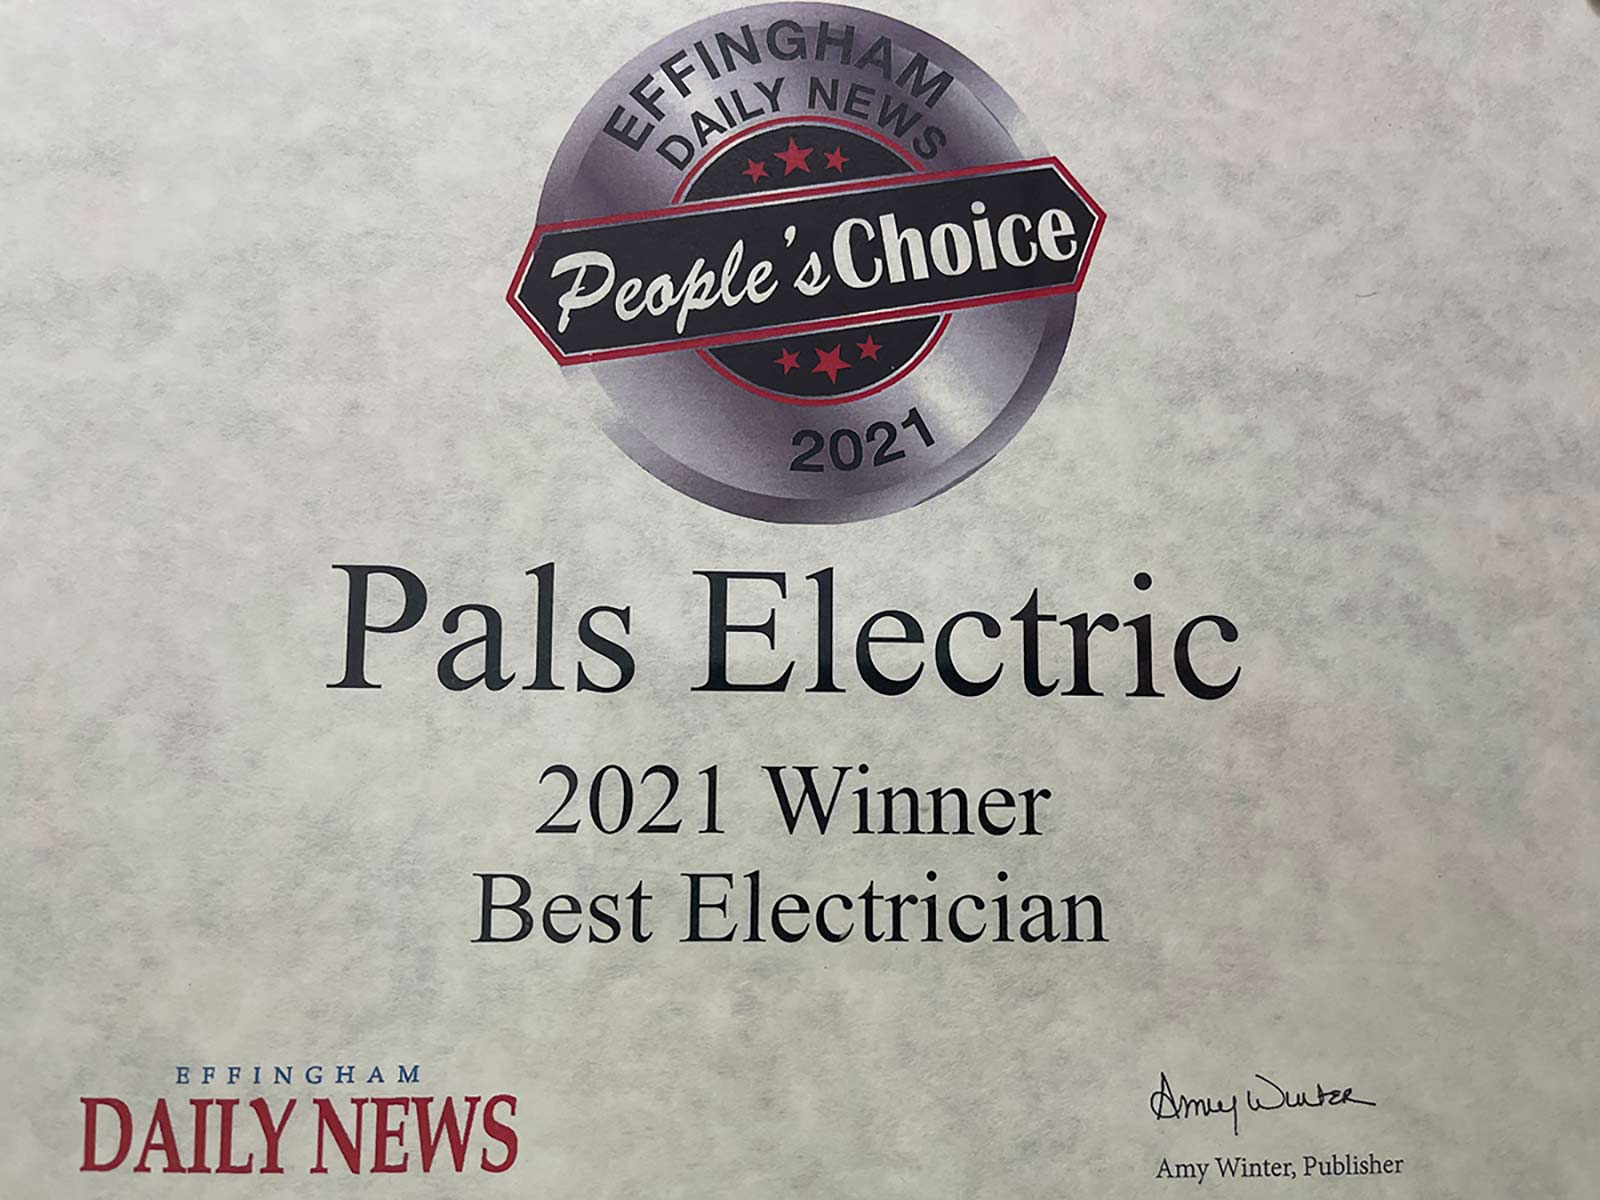 Effingham Daily News People's Choice 2021: Pals Electric for Best Electrician